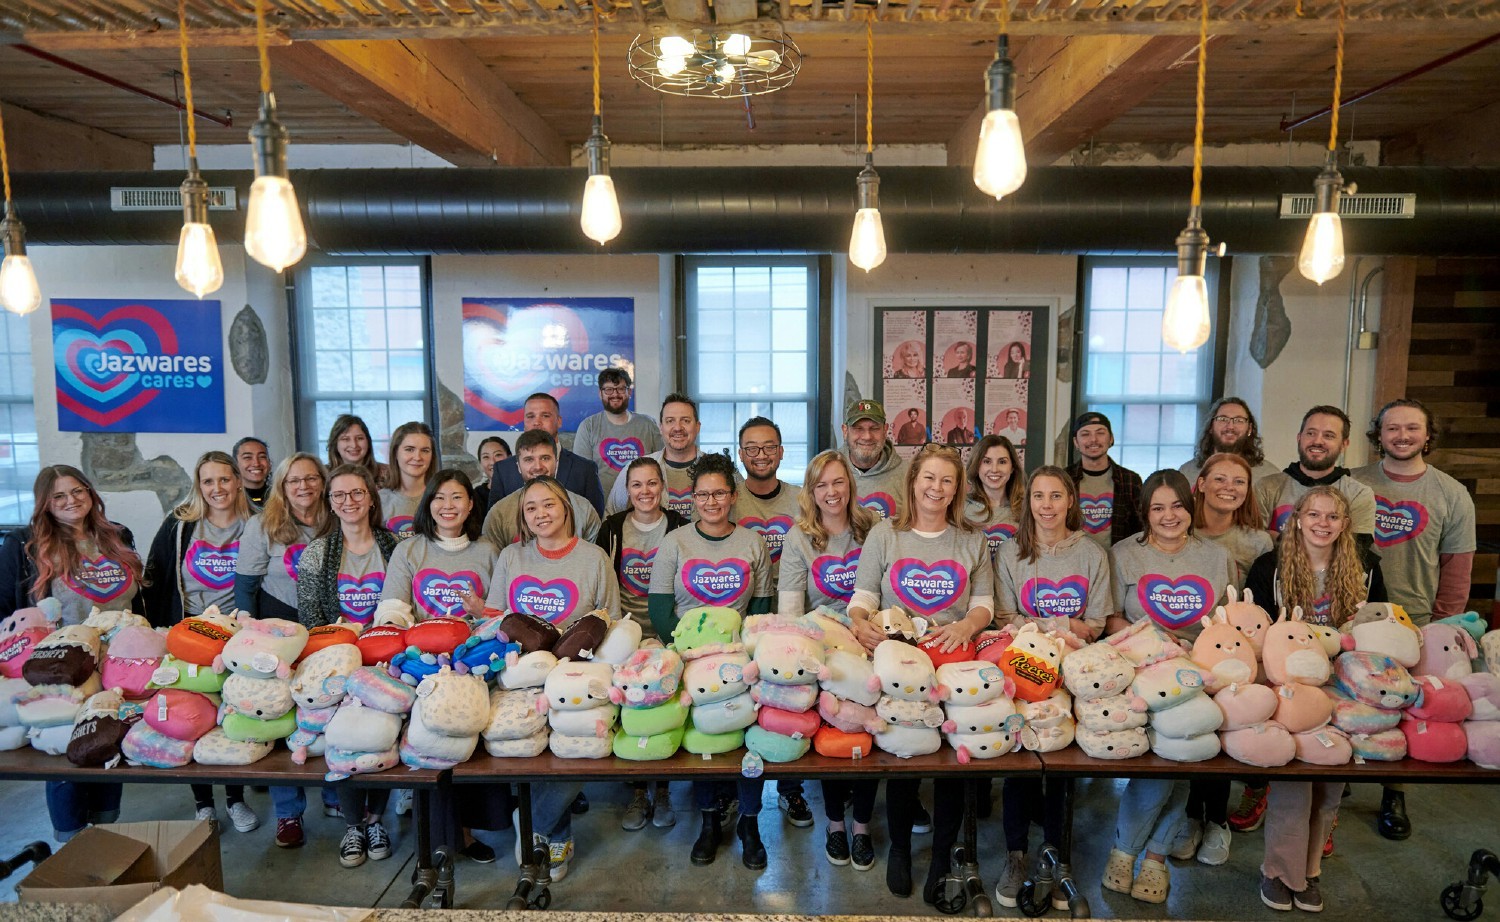 Jazwares employees in Bristol, PA donated Squishmallows to Shriners Children's Philadelphia